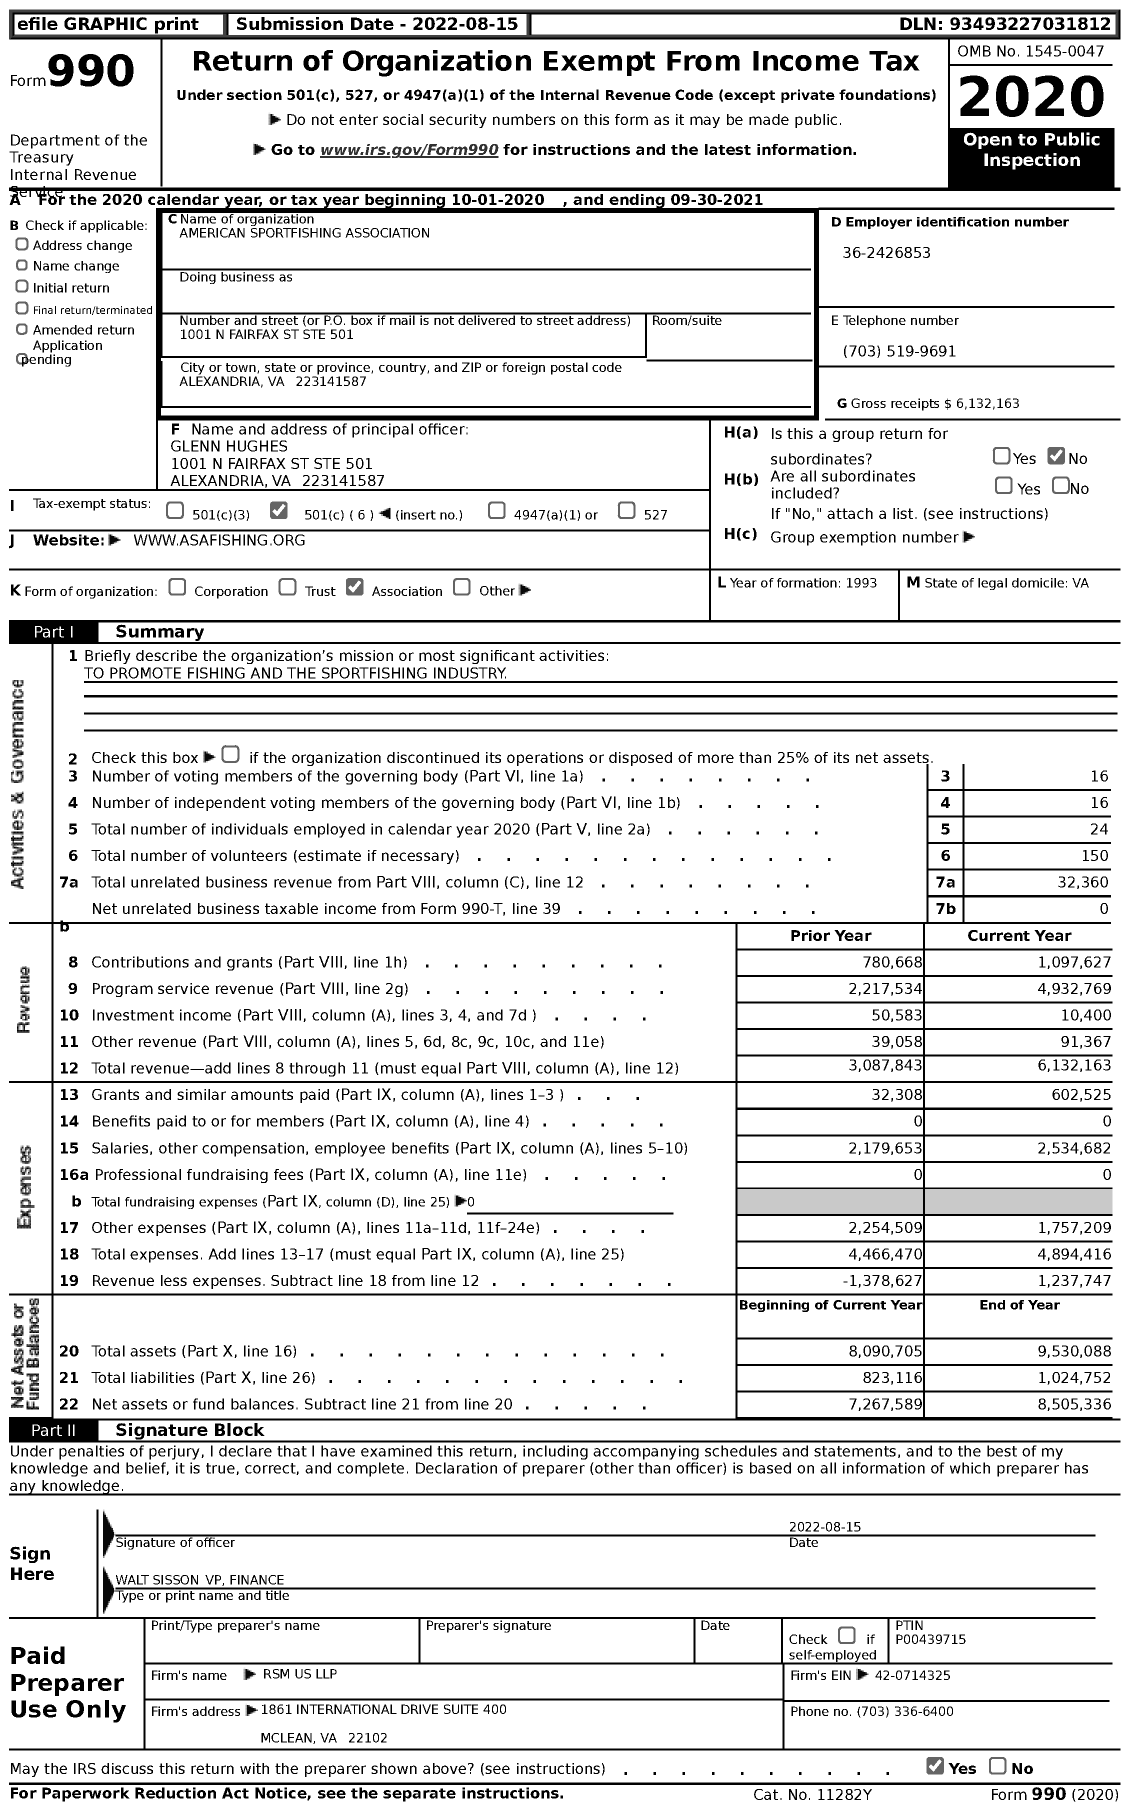 Image of first page of 2020 Form 990 for American Sportfishing Association (ASA)